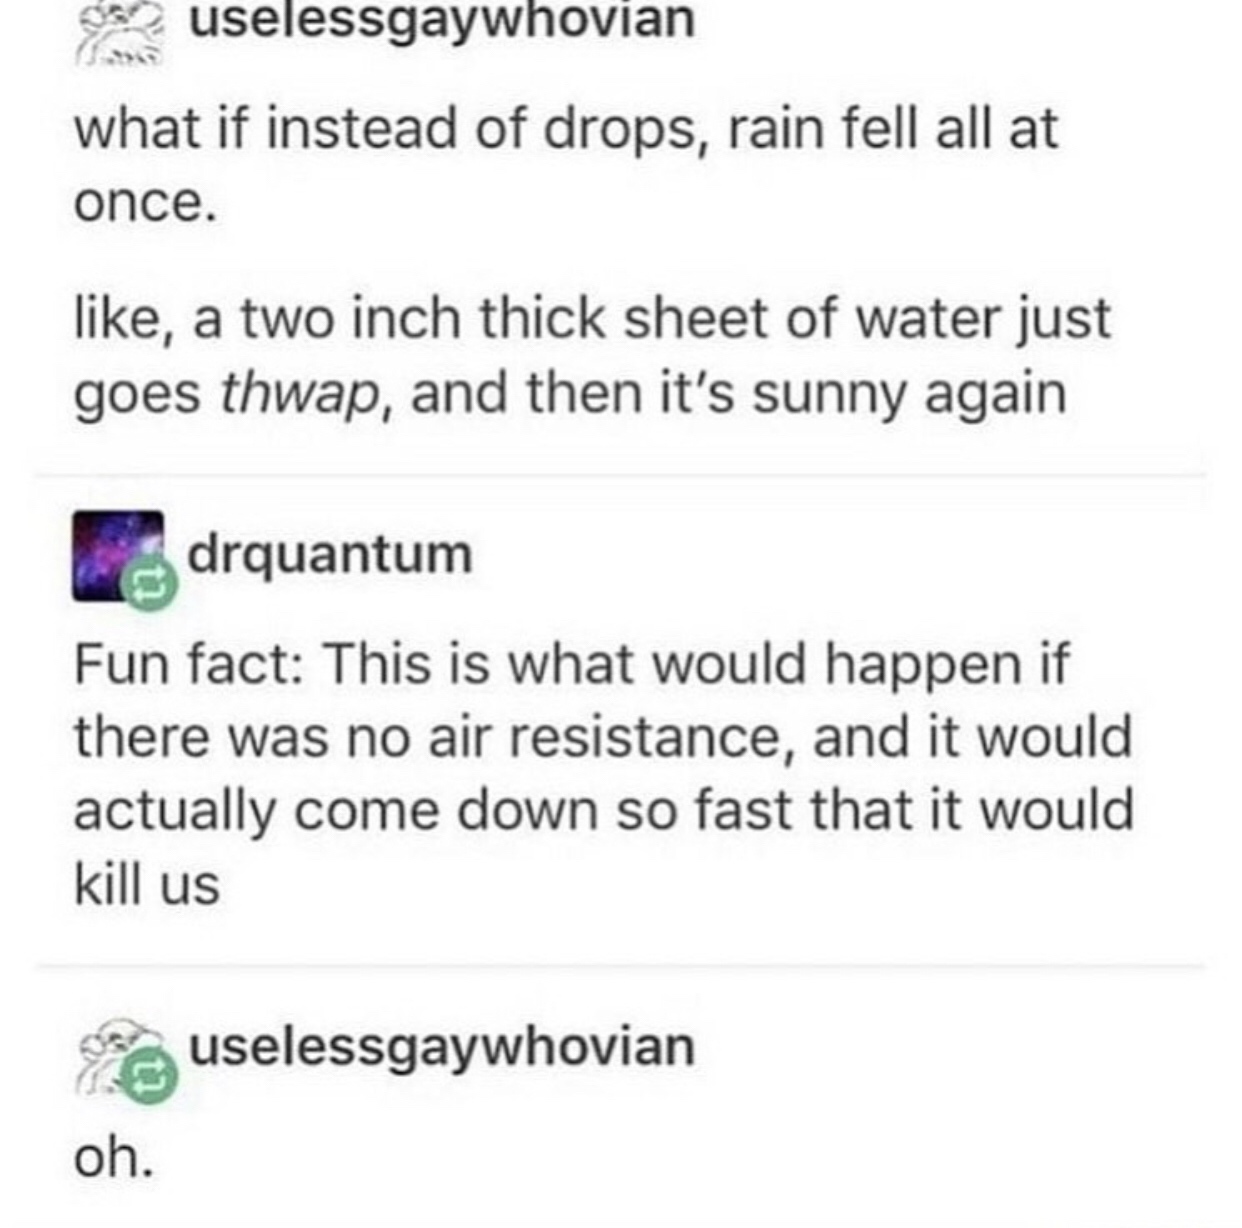 document - uselessgaywhovian what if instead of drops, rain fell all at once. , a two inch thick sheet of water just goes thwap, and then it's sunny again drquantum Fun fact This is what would happen if there was no air resistance, and it would actually c